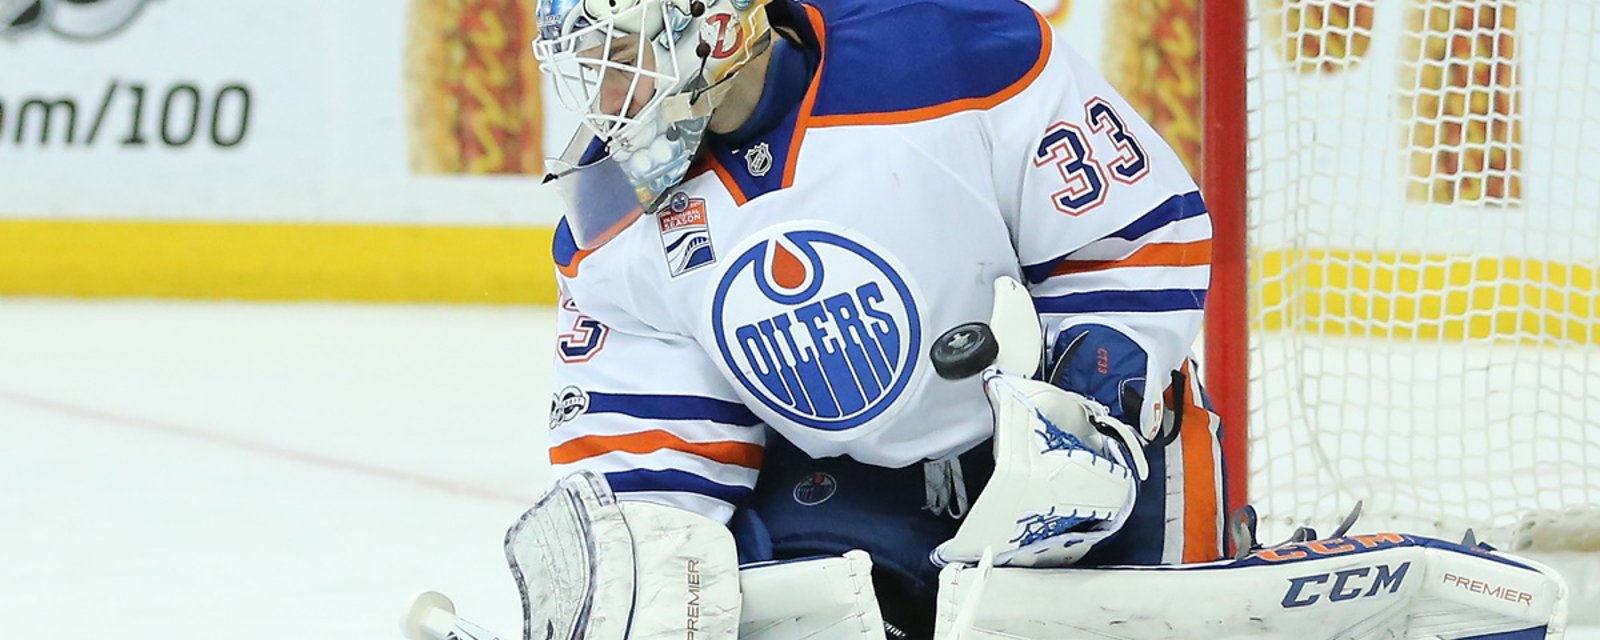 Breaking: Talbot gets a chance to get his head back in the game 